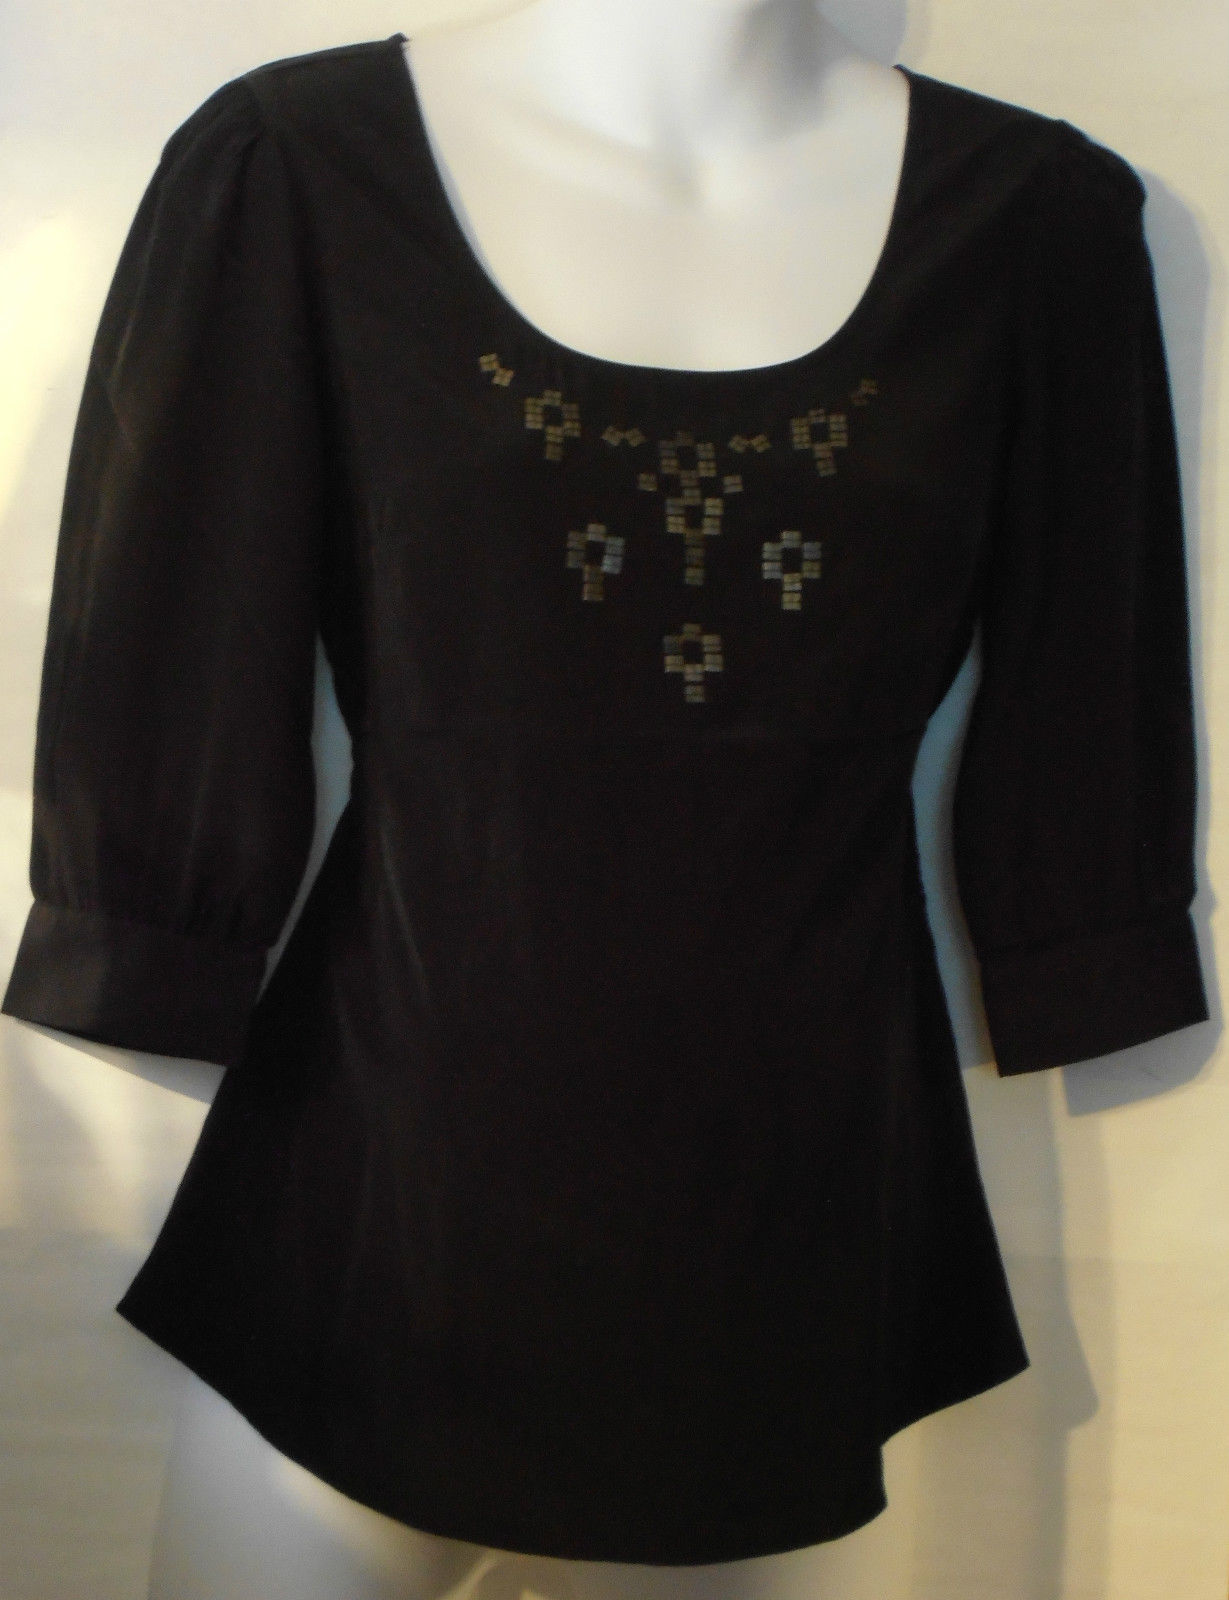 Gap Maternity Black Tie Back Sequin-Trim Blouse Top Shirt X-Small NWT Nice! -- US Delivery